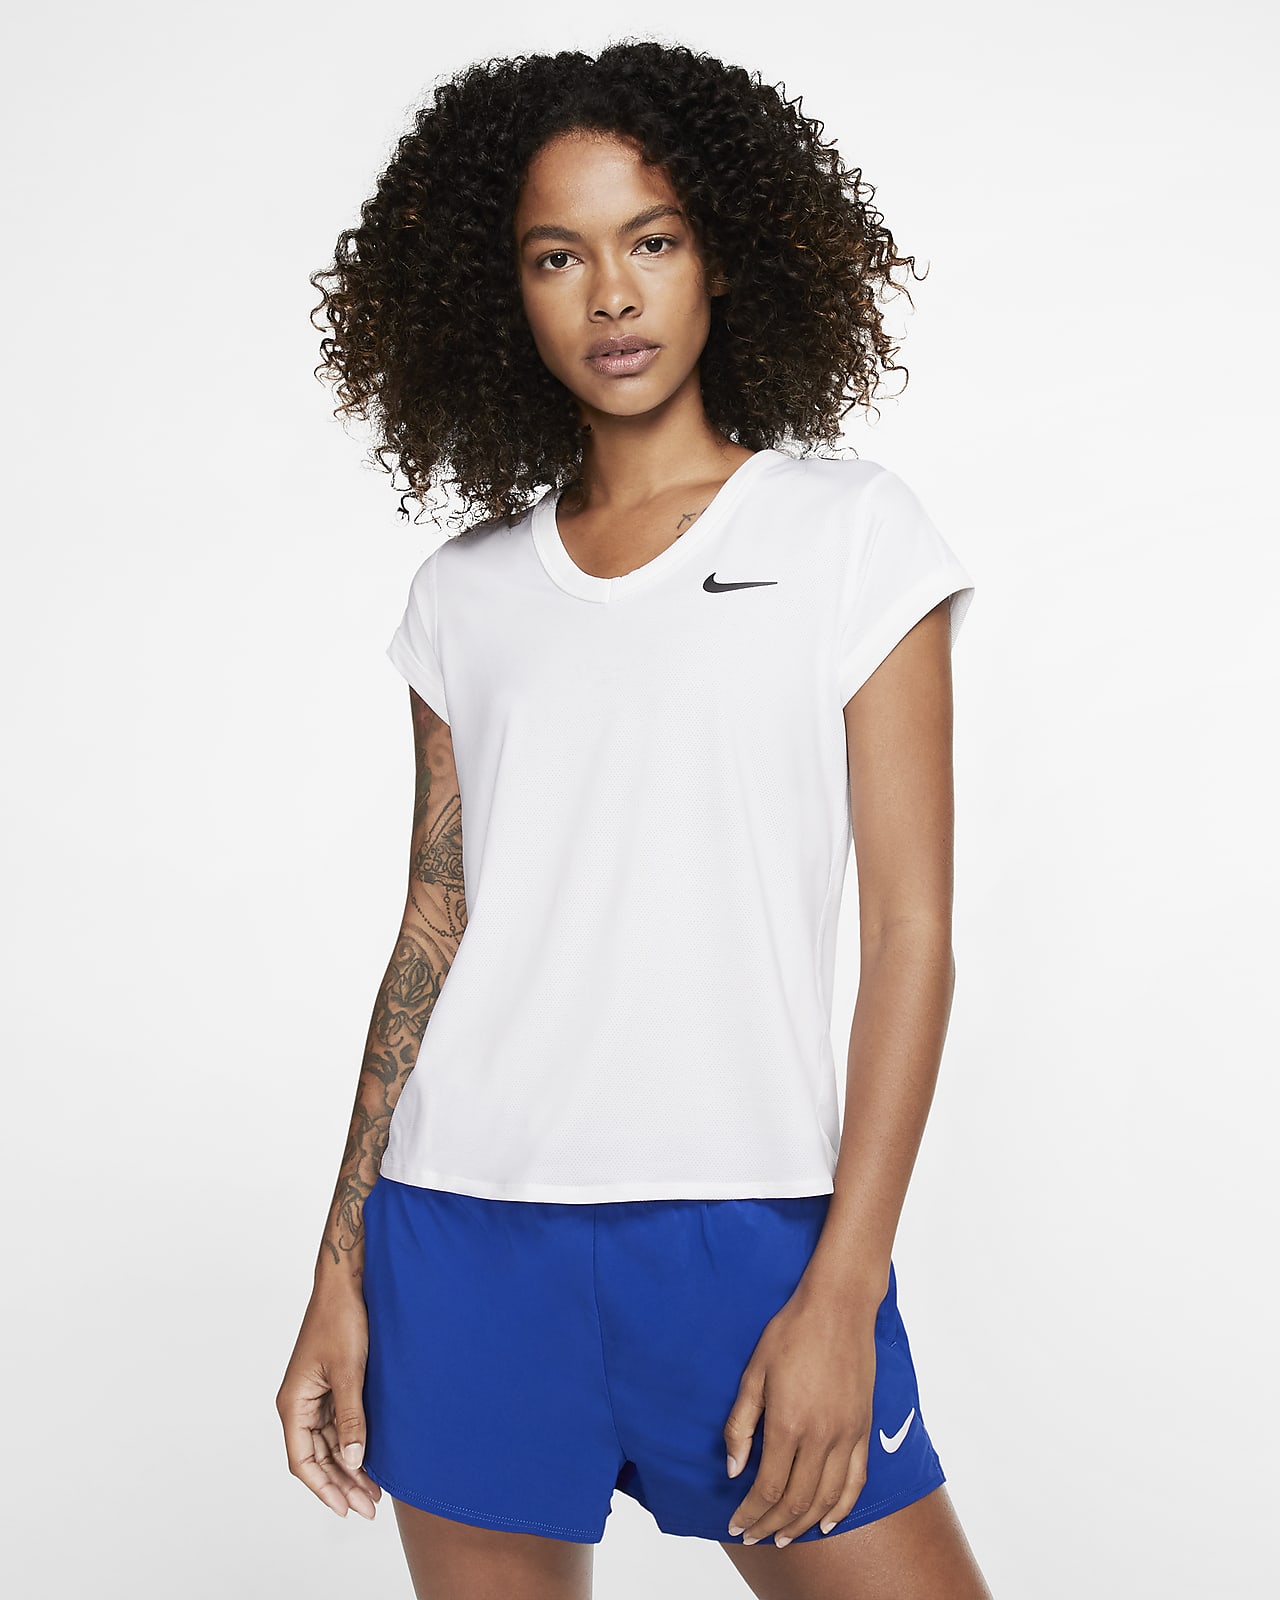 nike shorts with spandex built in women's